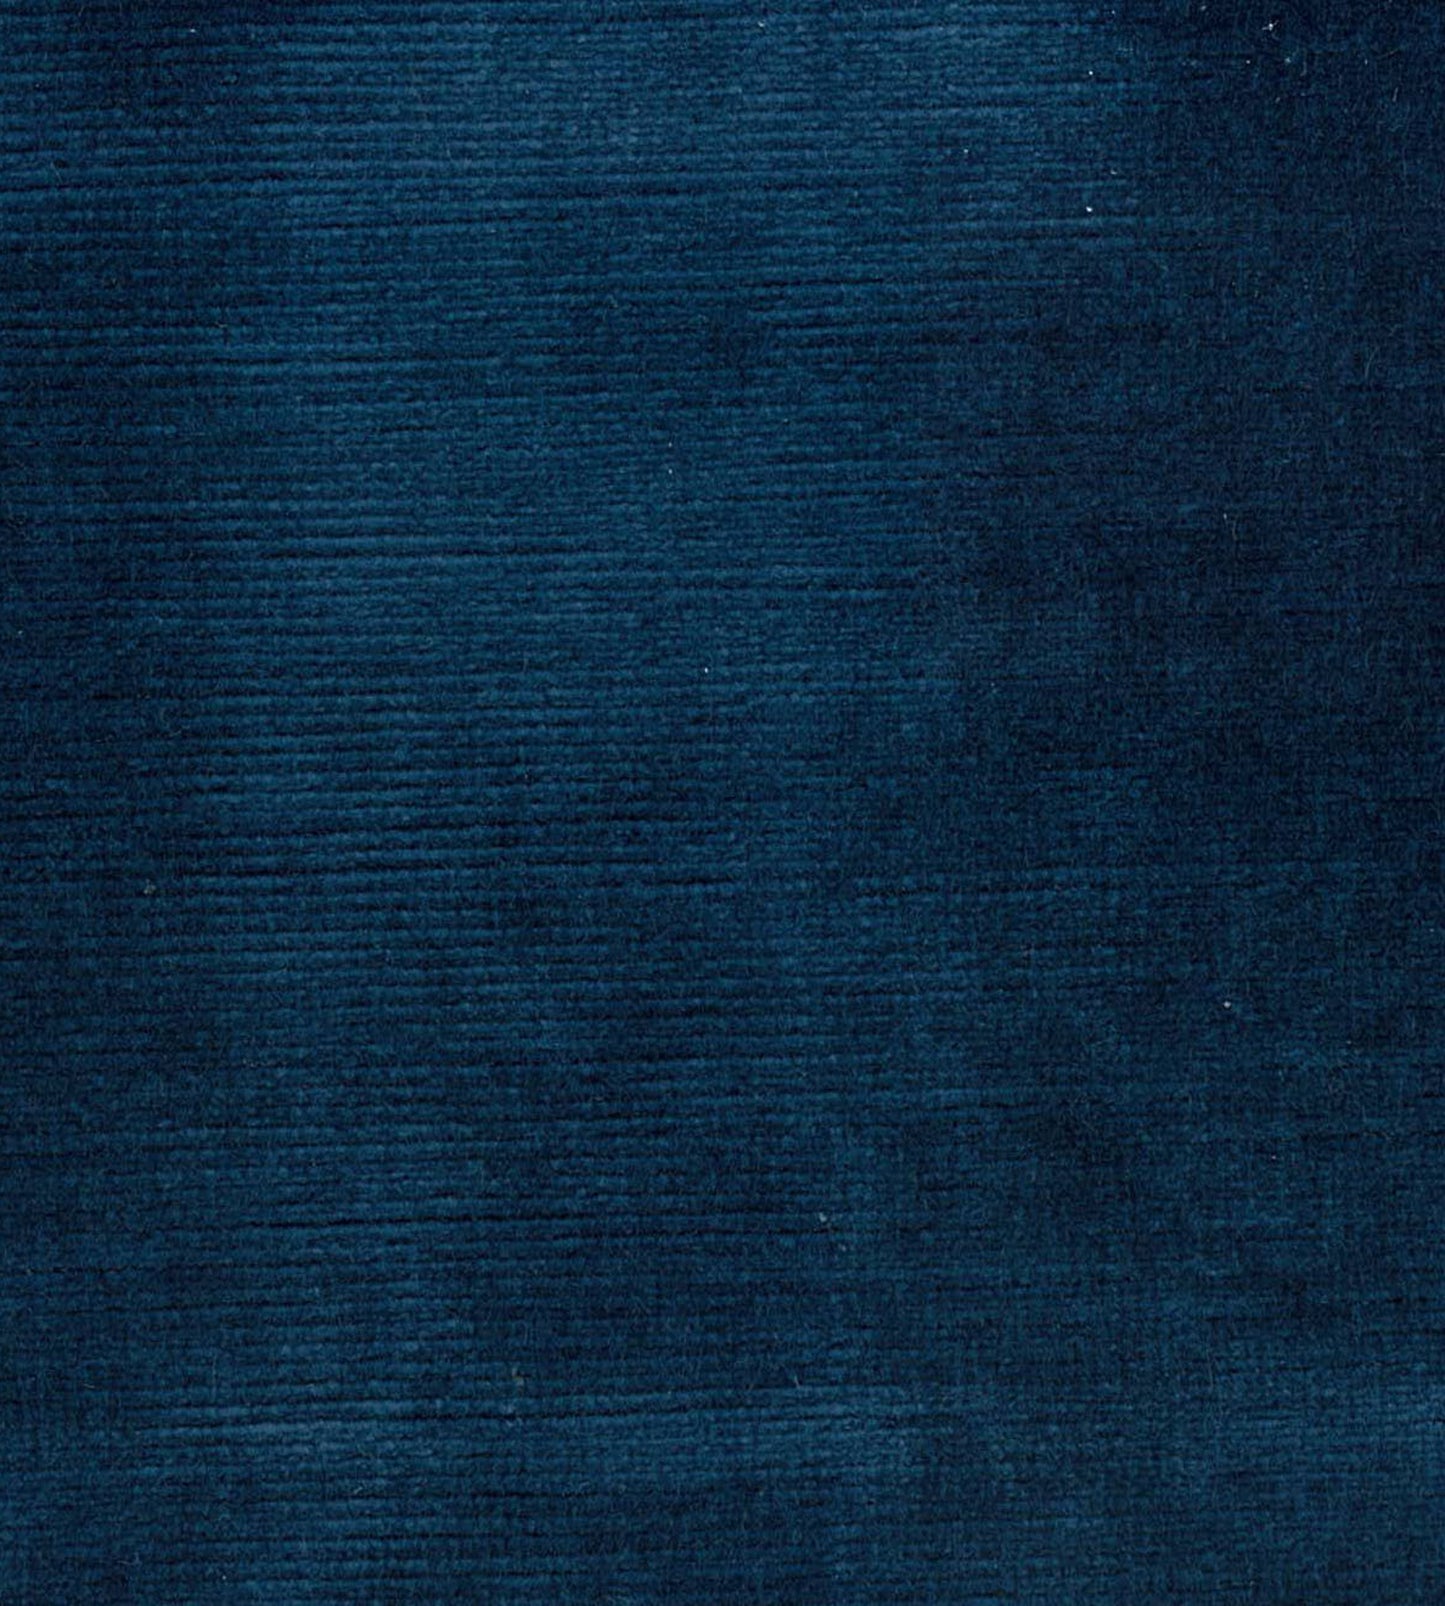 Purchase Old World Weavers Fabric Product# AB 03124920, Taos Navy 1